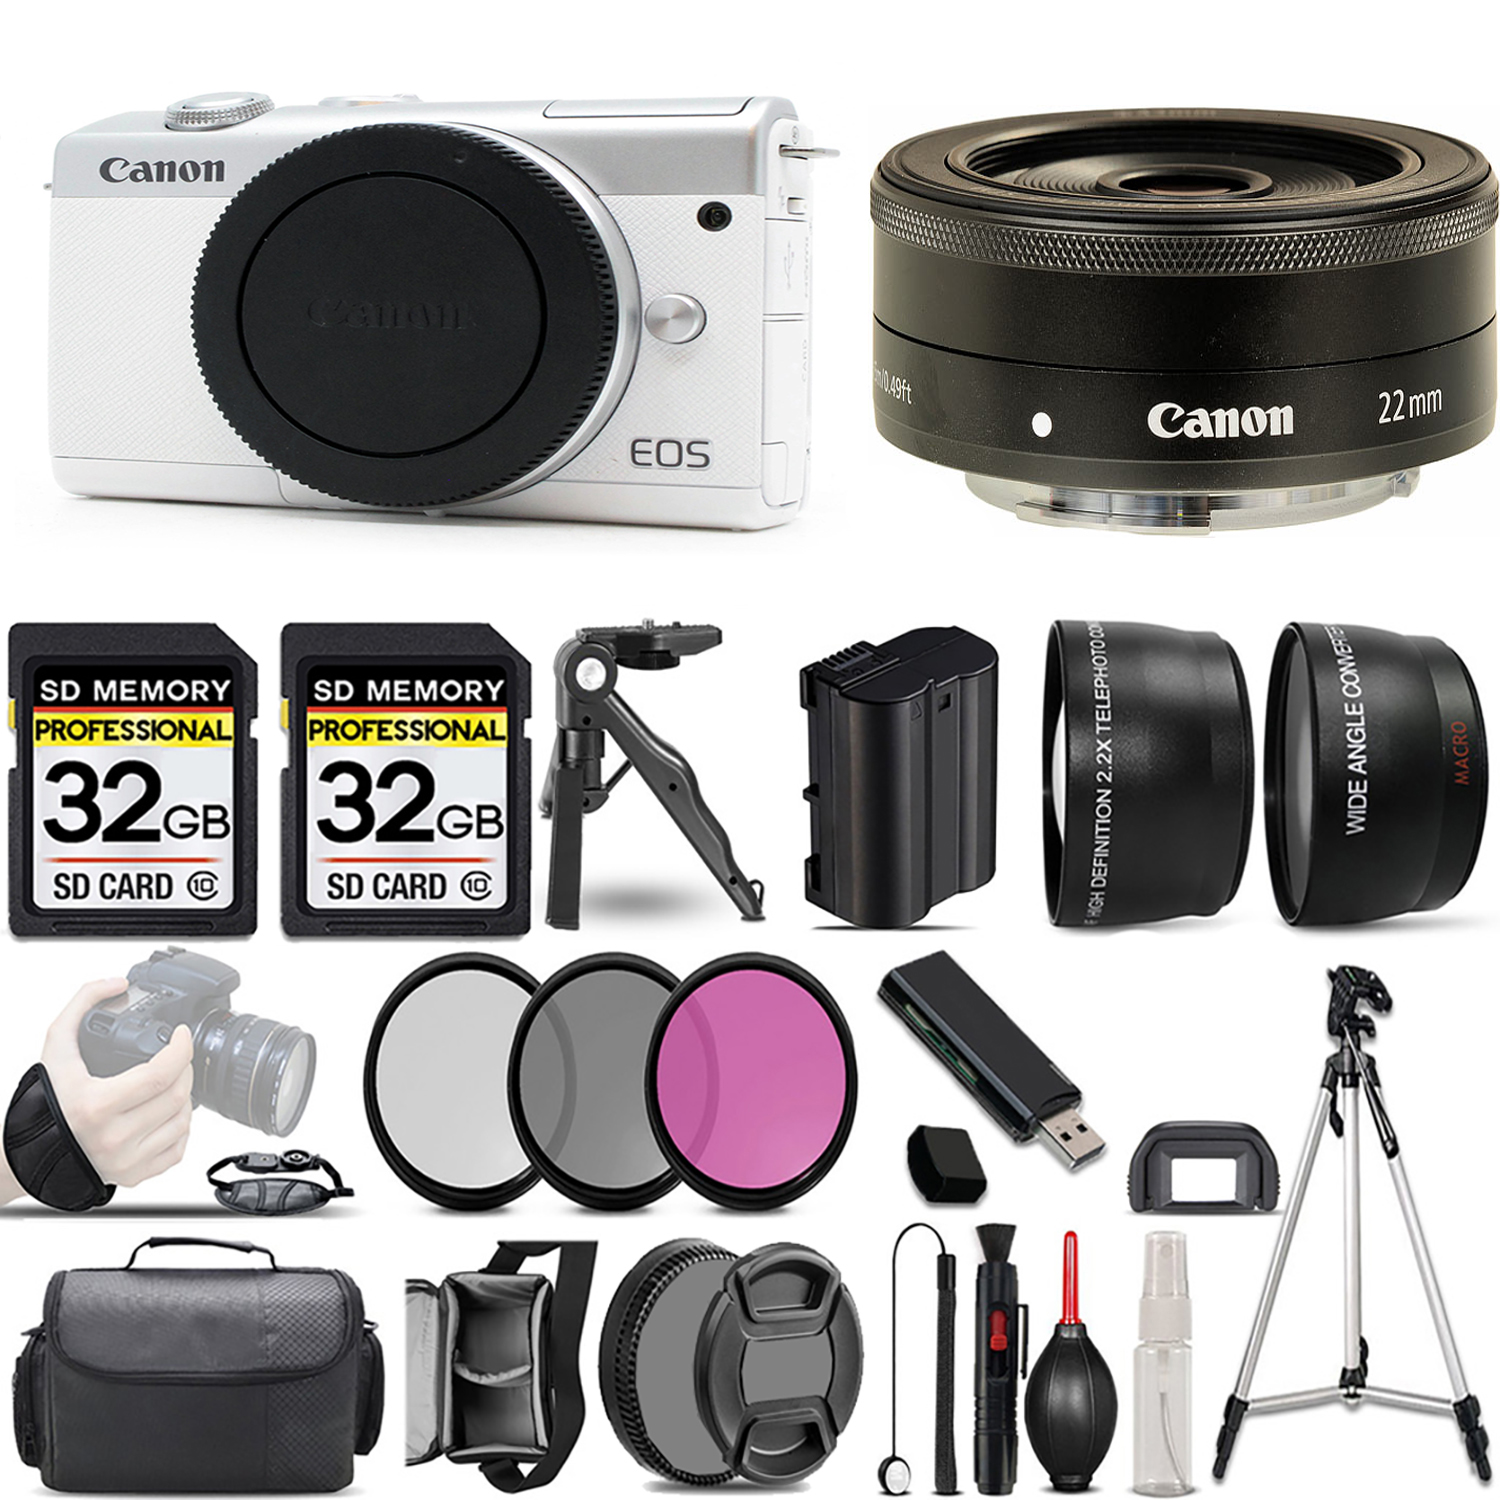 EOS M200  Camera (White) + 22mm f/2 STM Lens + 3 Piece Filter Set + 64GB *FREE SHIPPING*